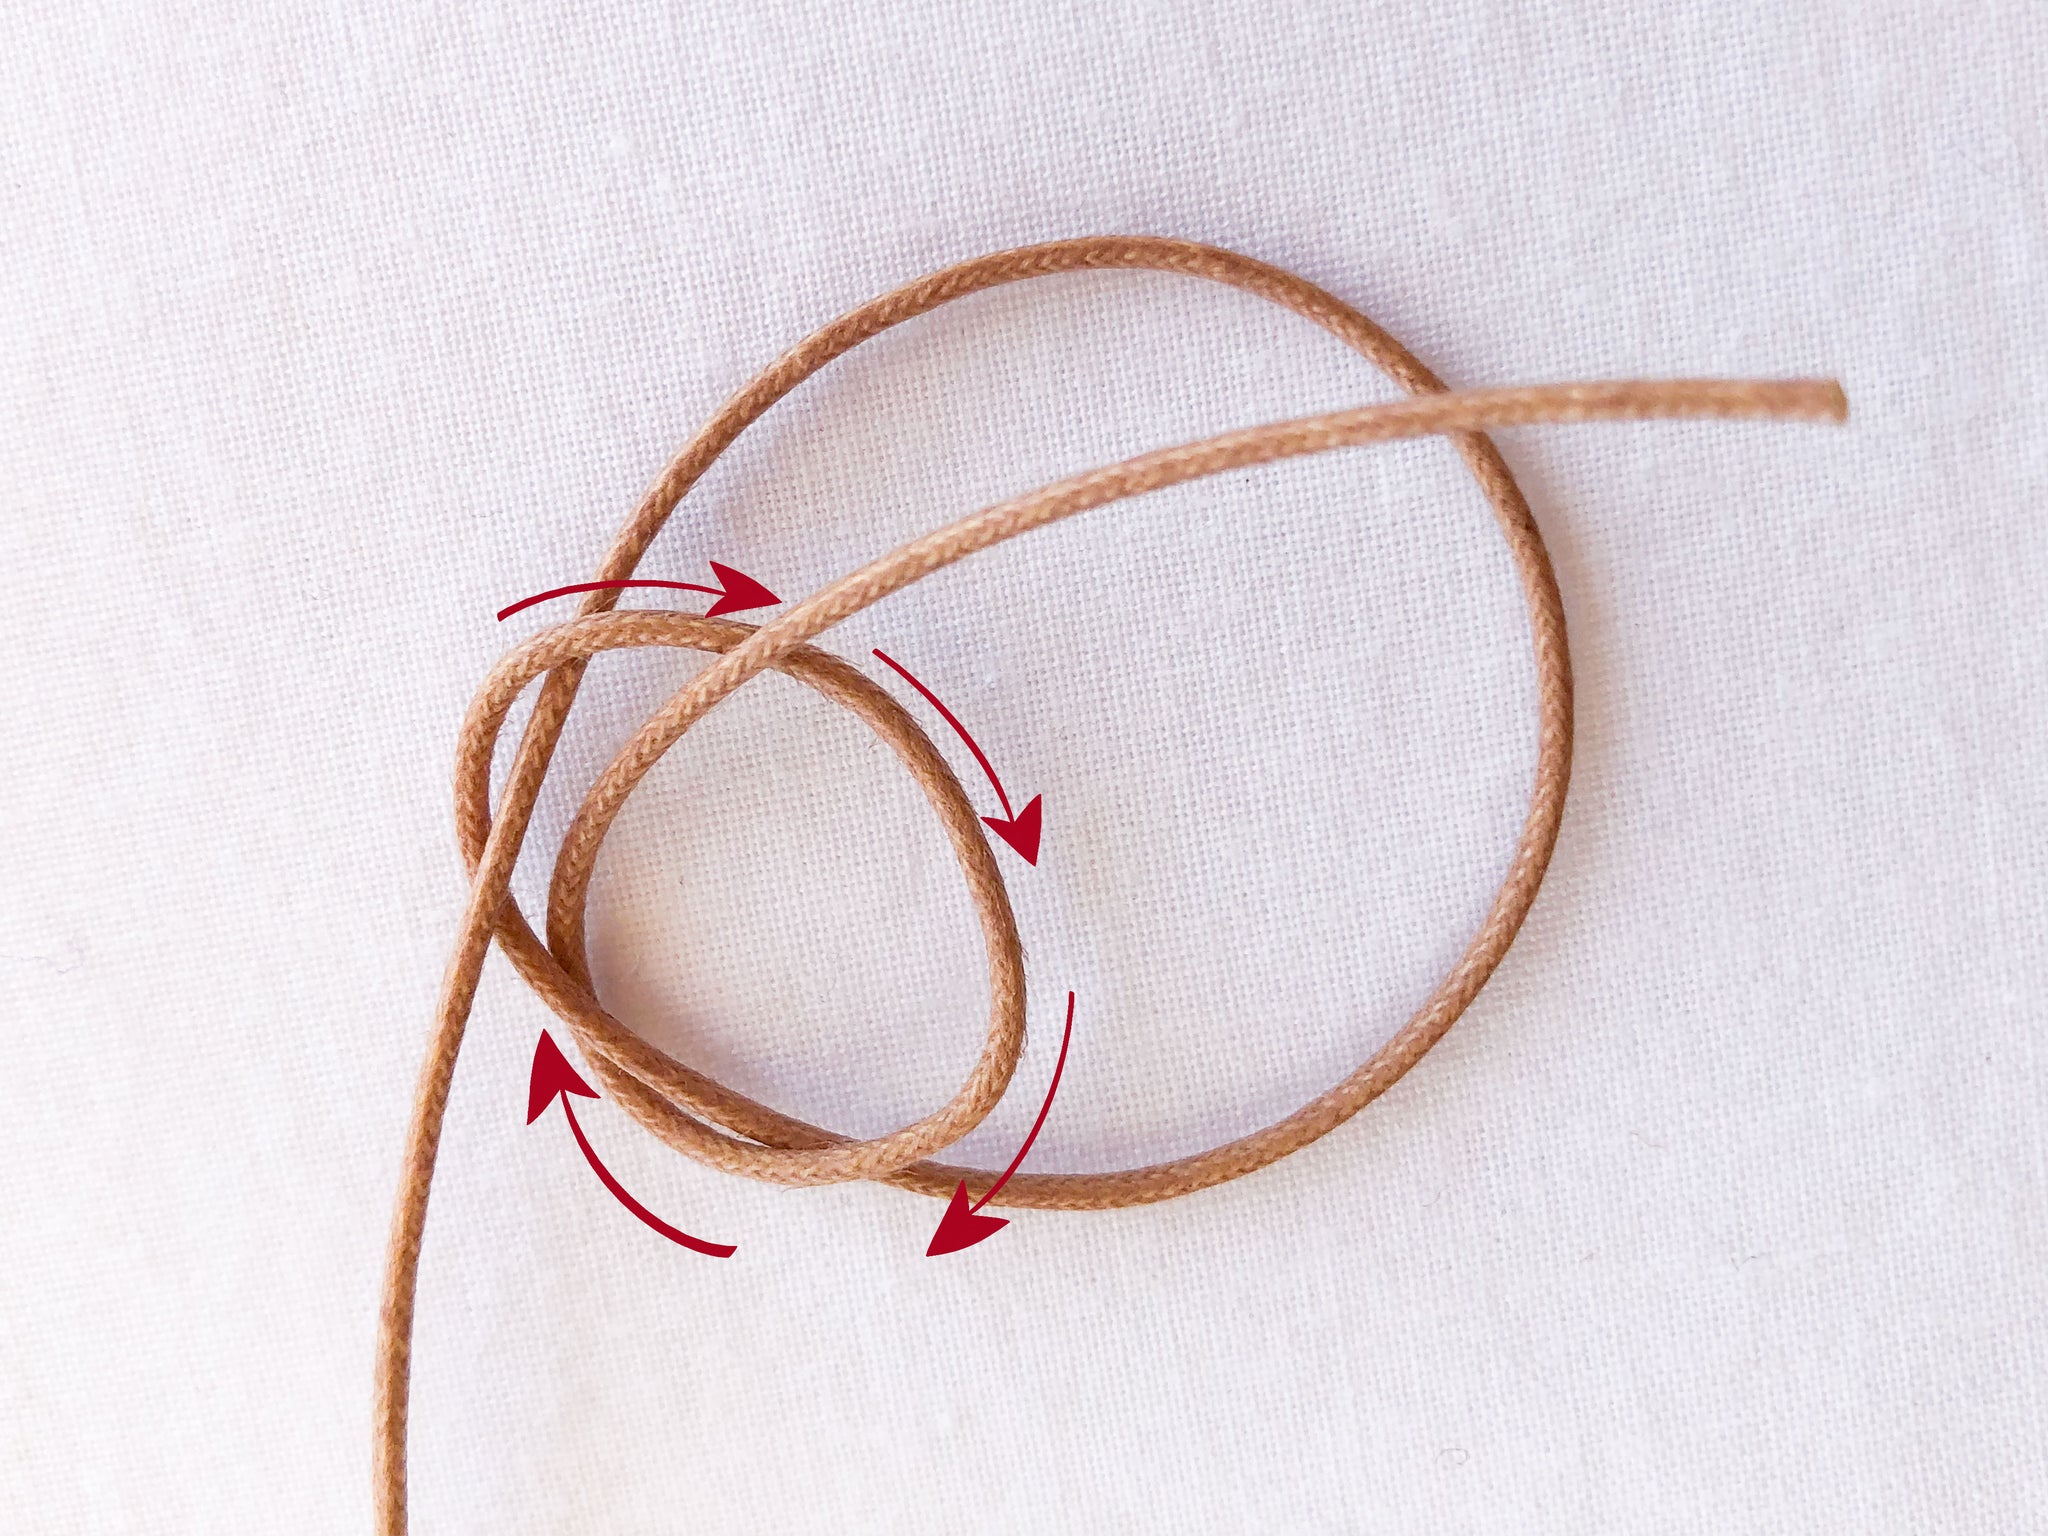 How to tie a slip knot step 3